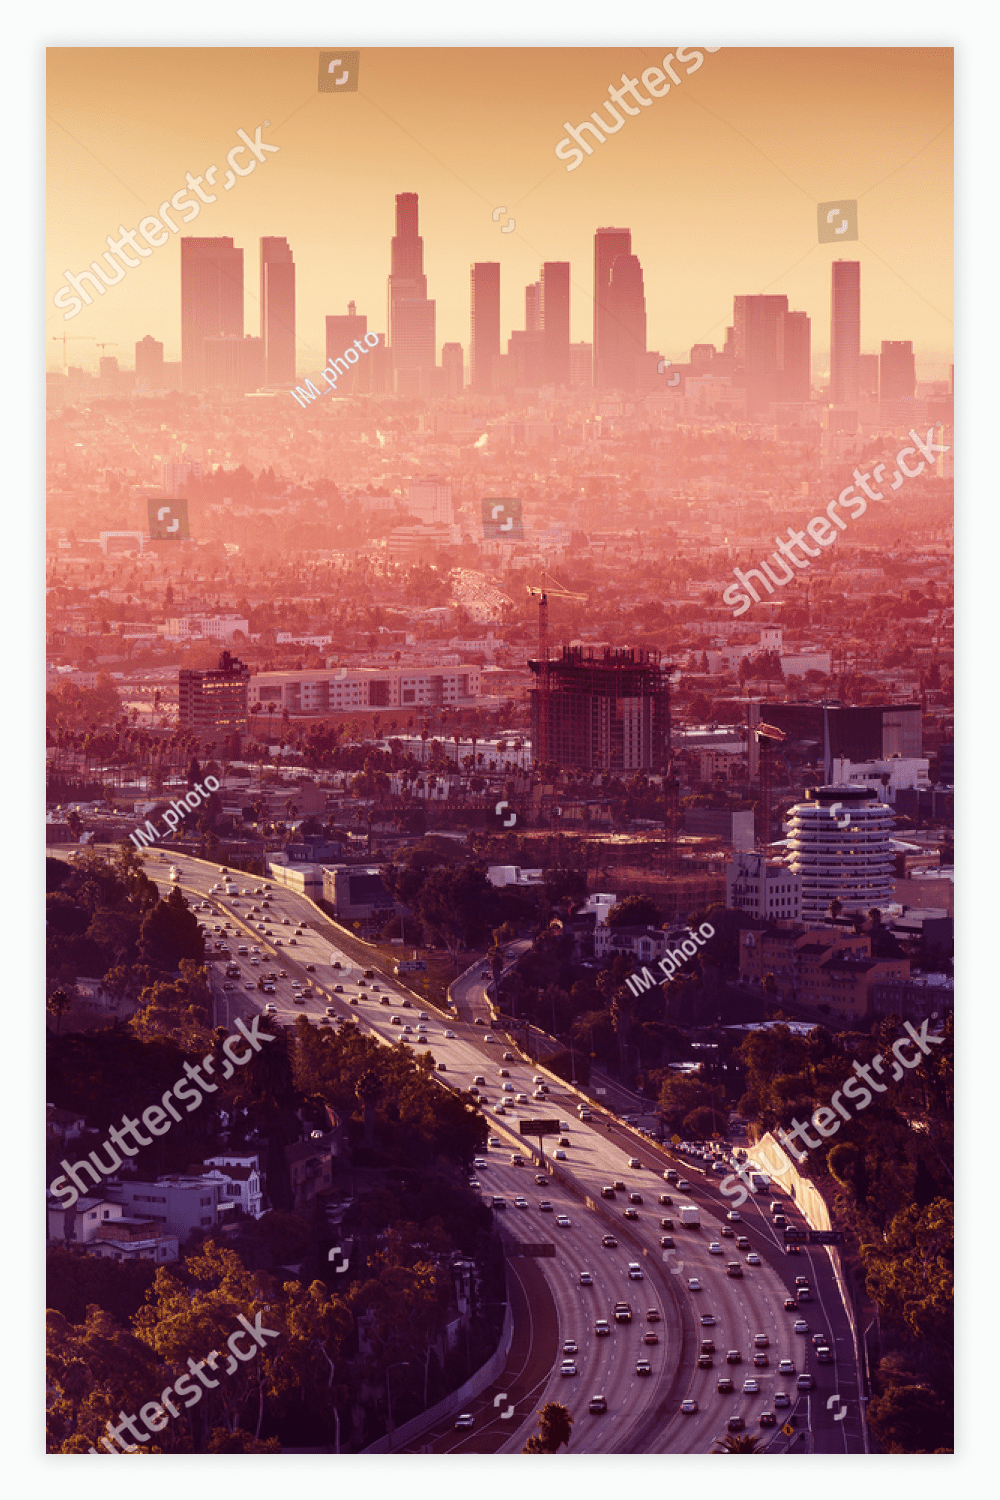 Los Angeles - California City Skyline at Sunset in the Background.